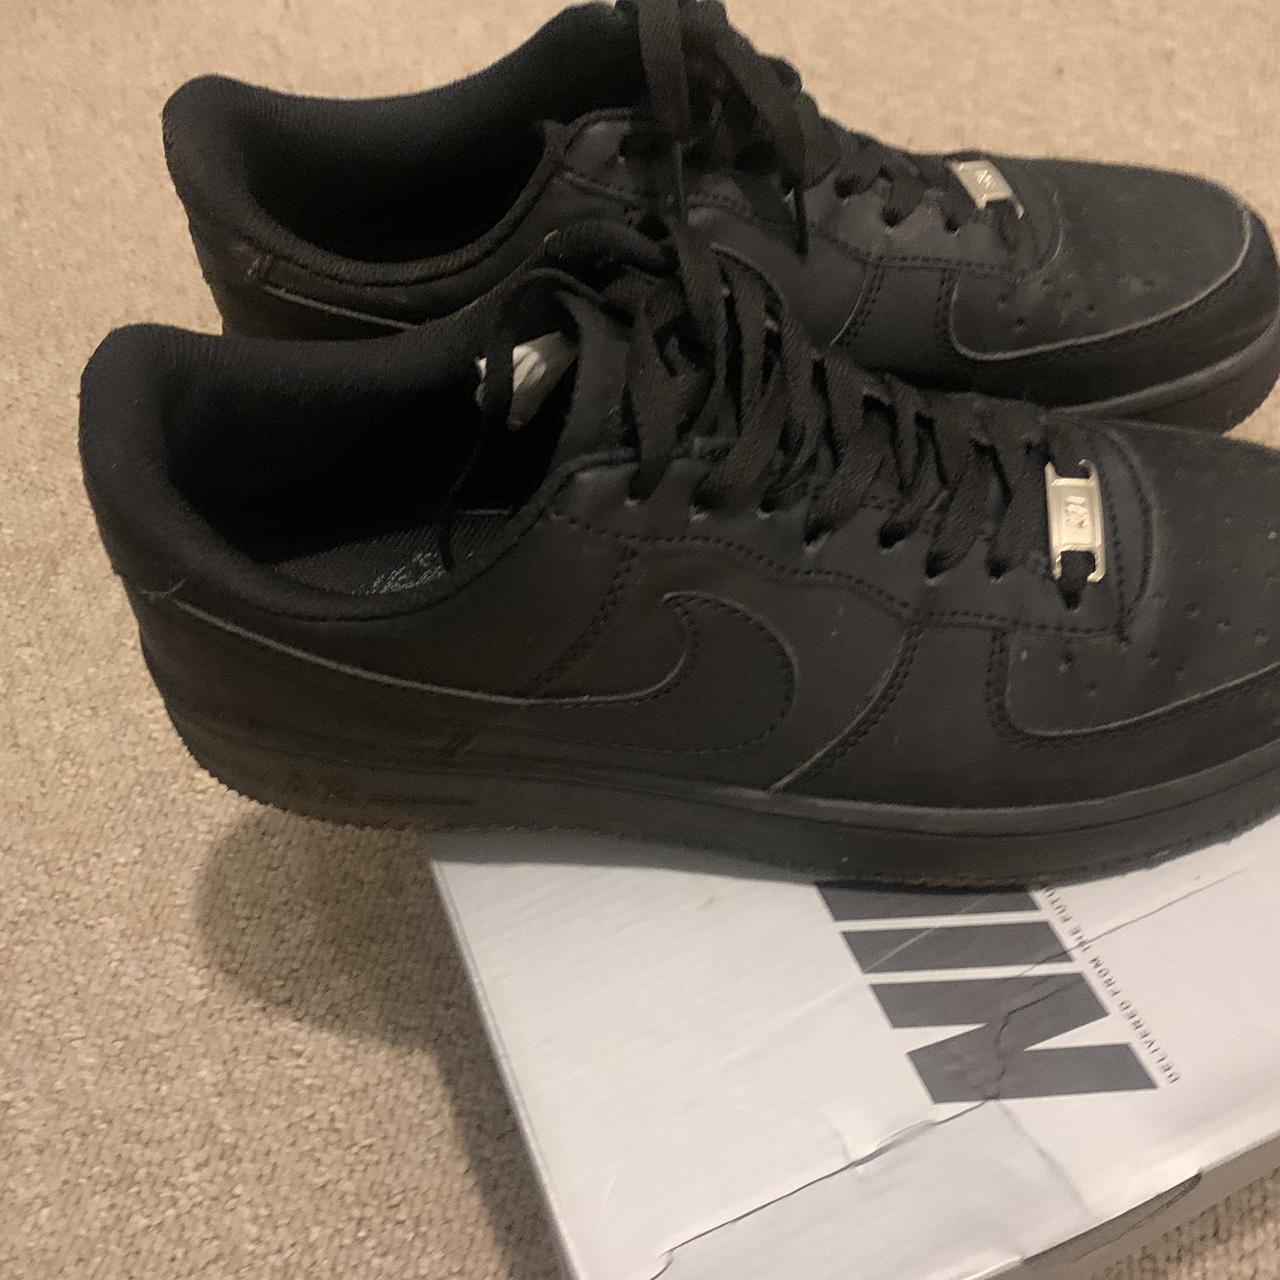 Black air force 1s. Shoes are in perfect condition - Depop